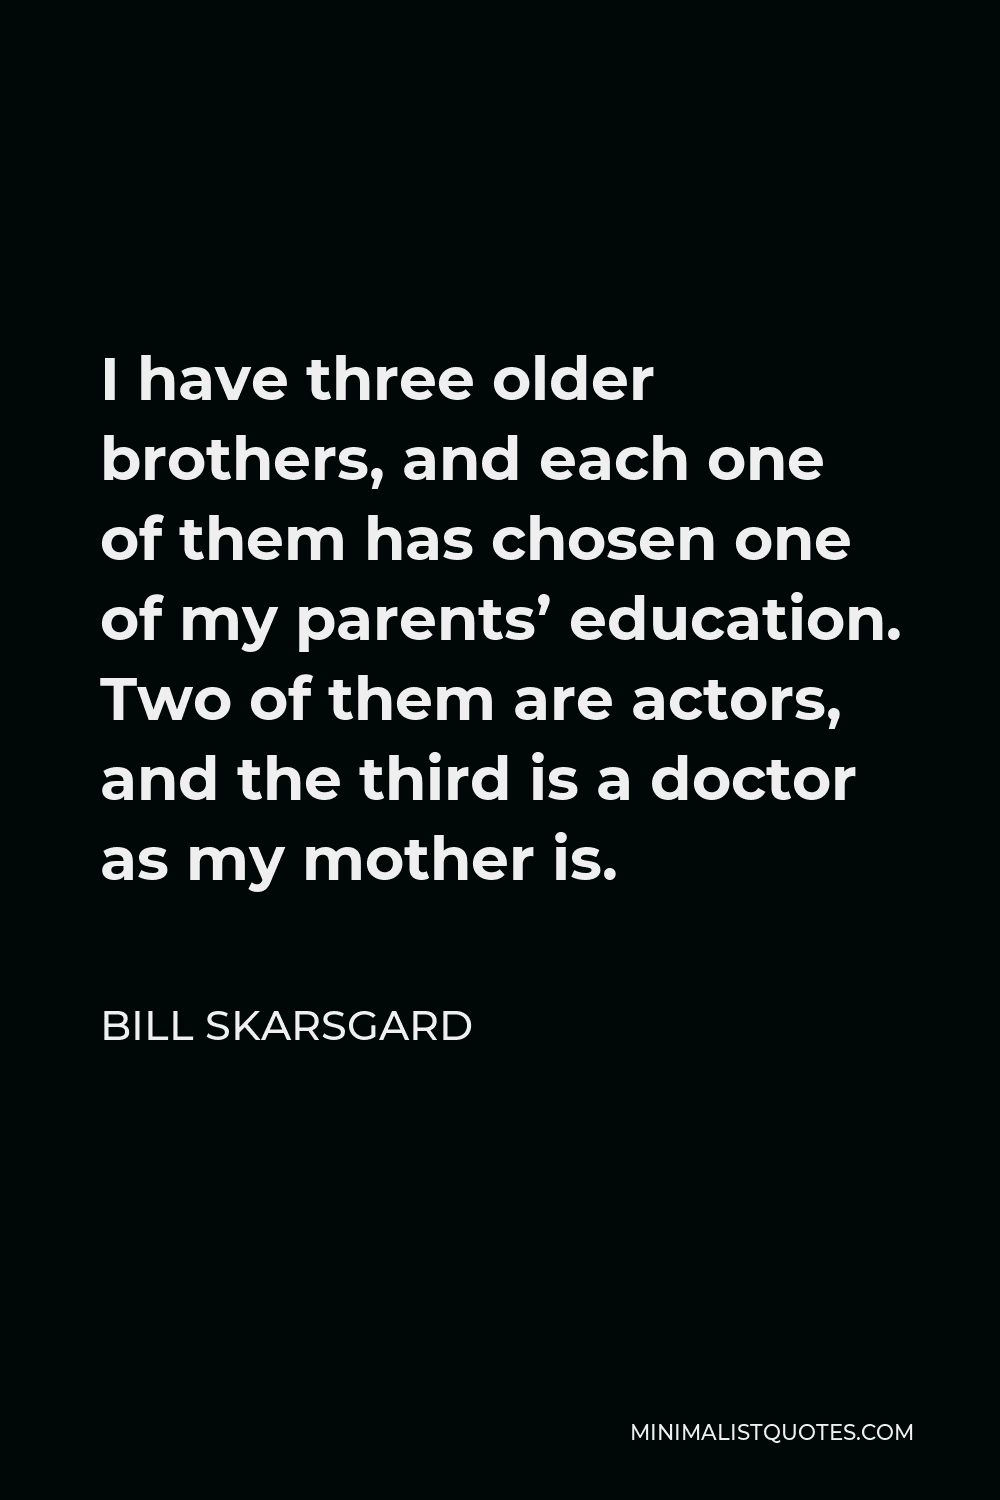 Bill Skarsgard Quote - I have three older brothers, and each one of them has chosen one of my parents’ education. Two of them are actors, and the third is a doctor as my mother is.